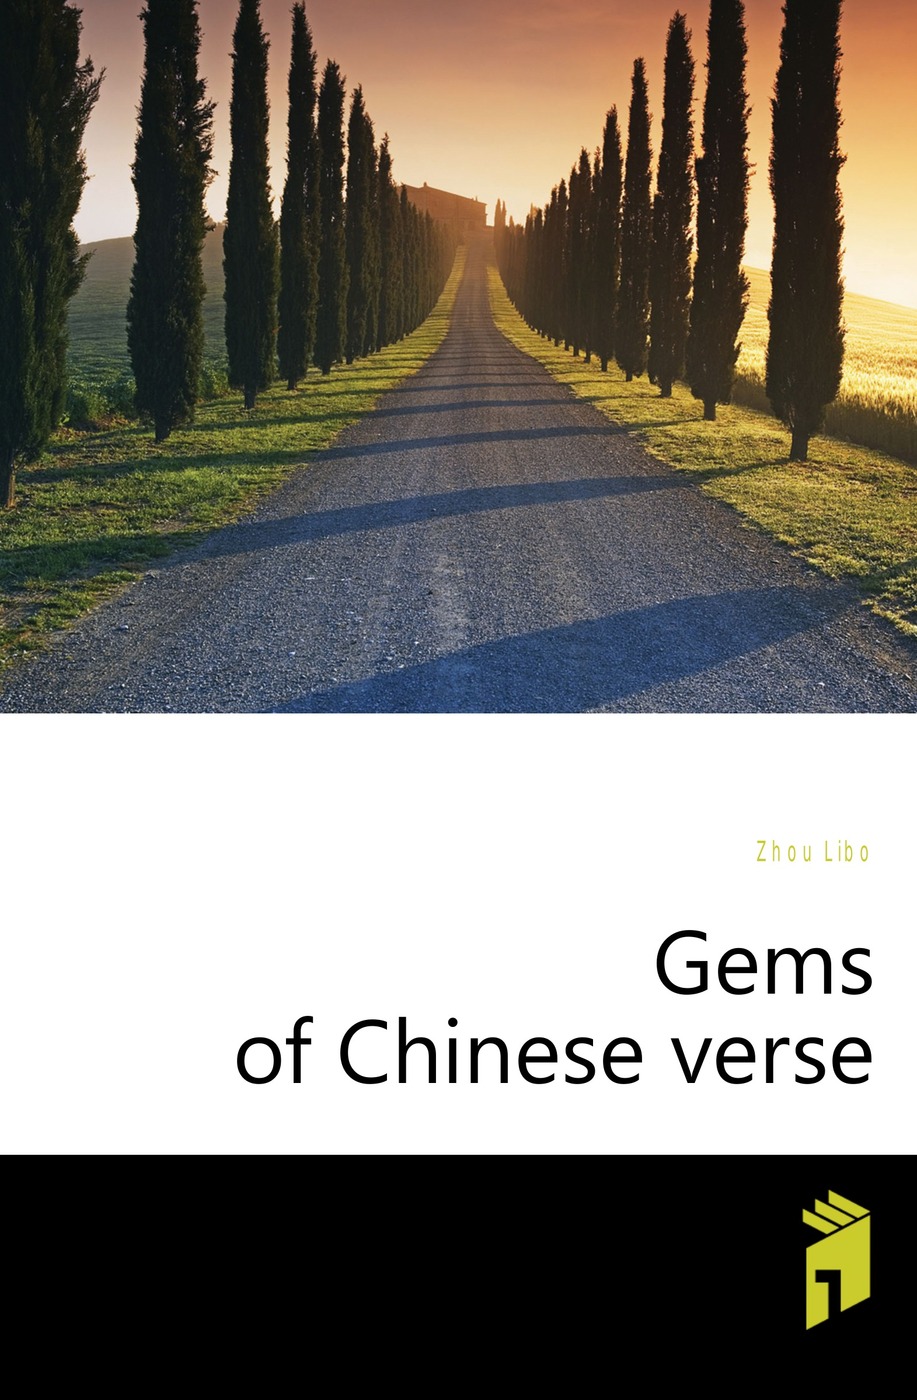 Gems of Chinese verse